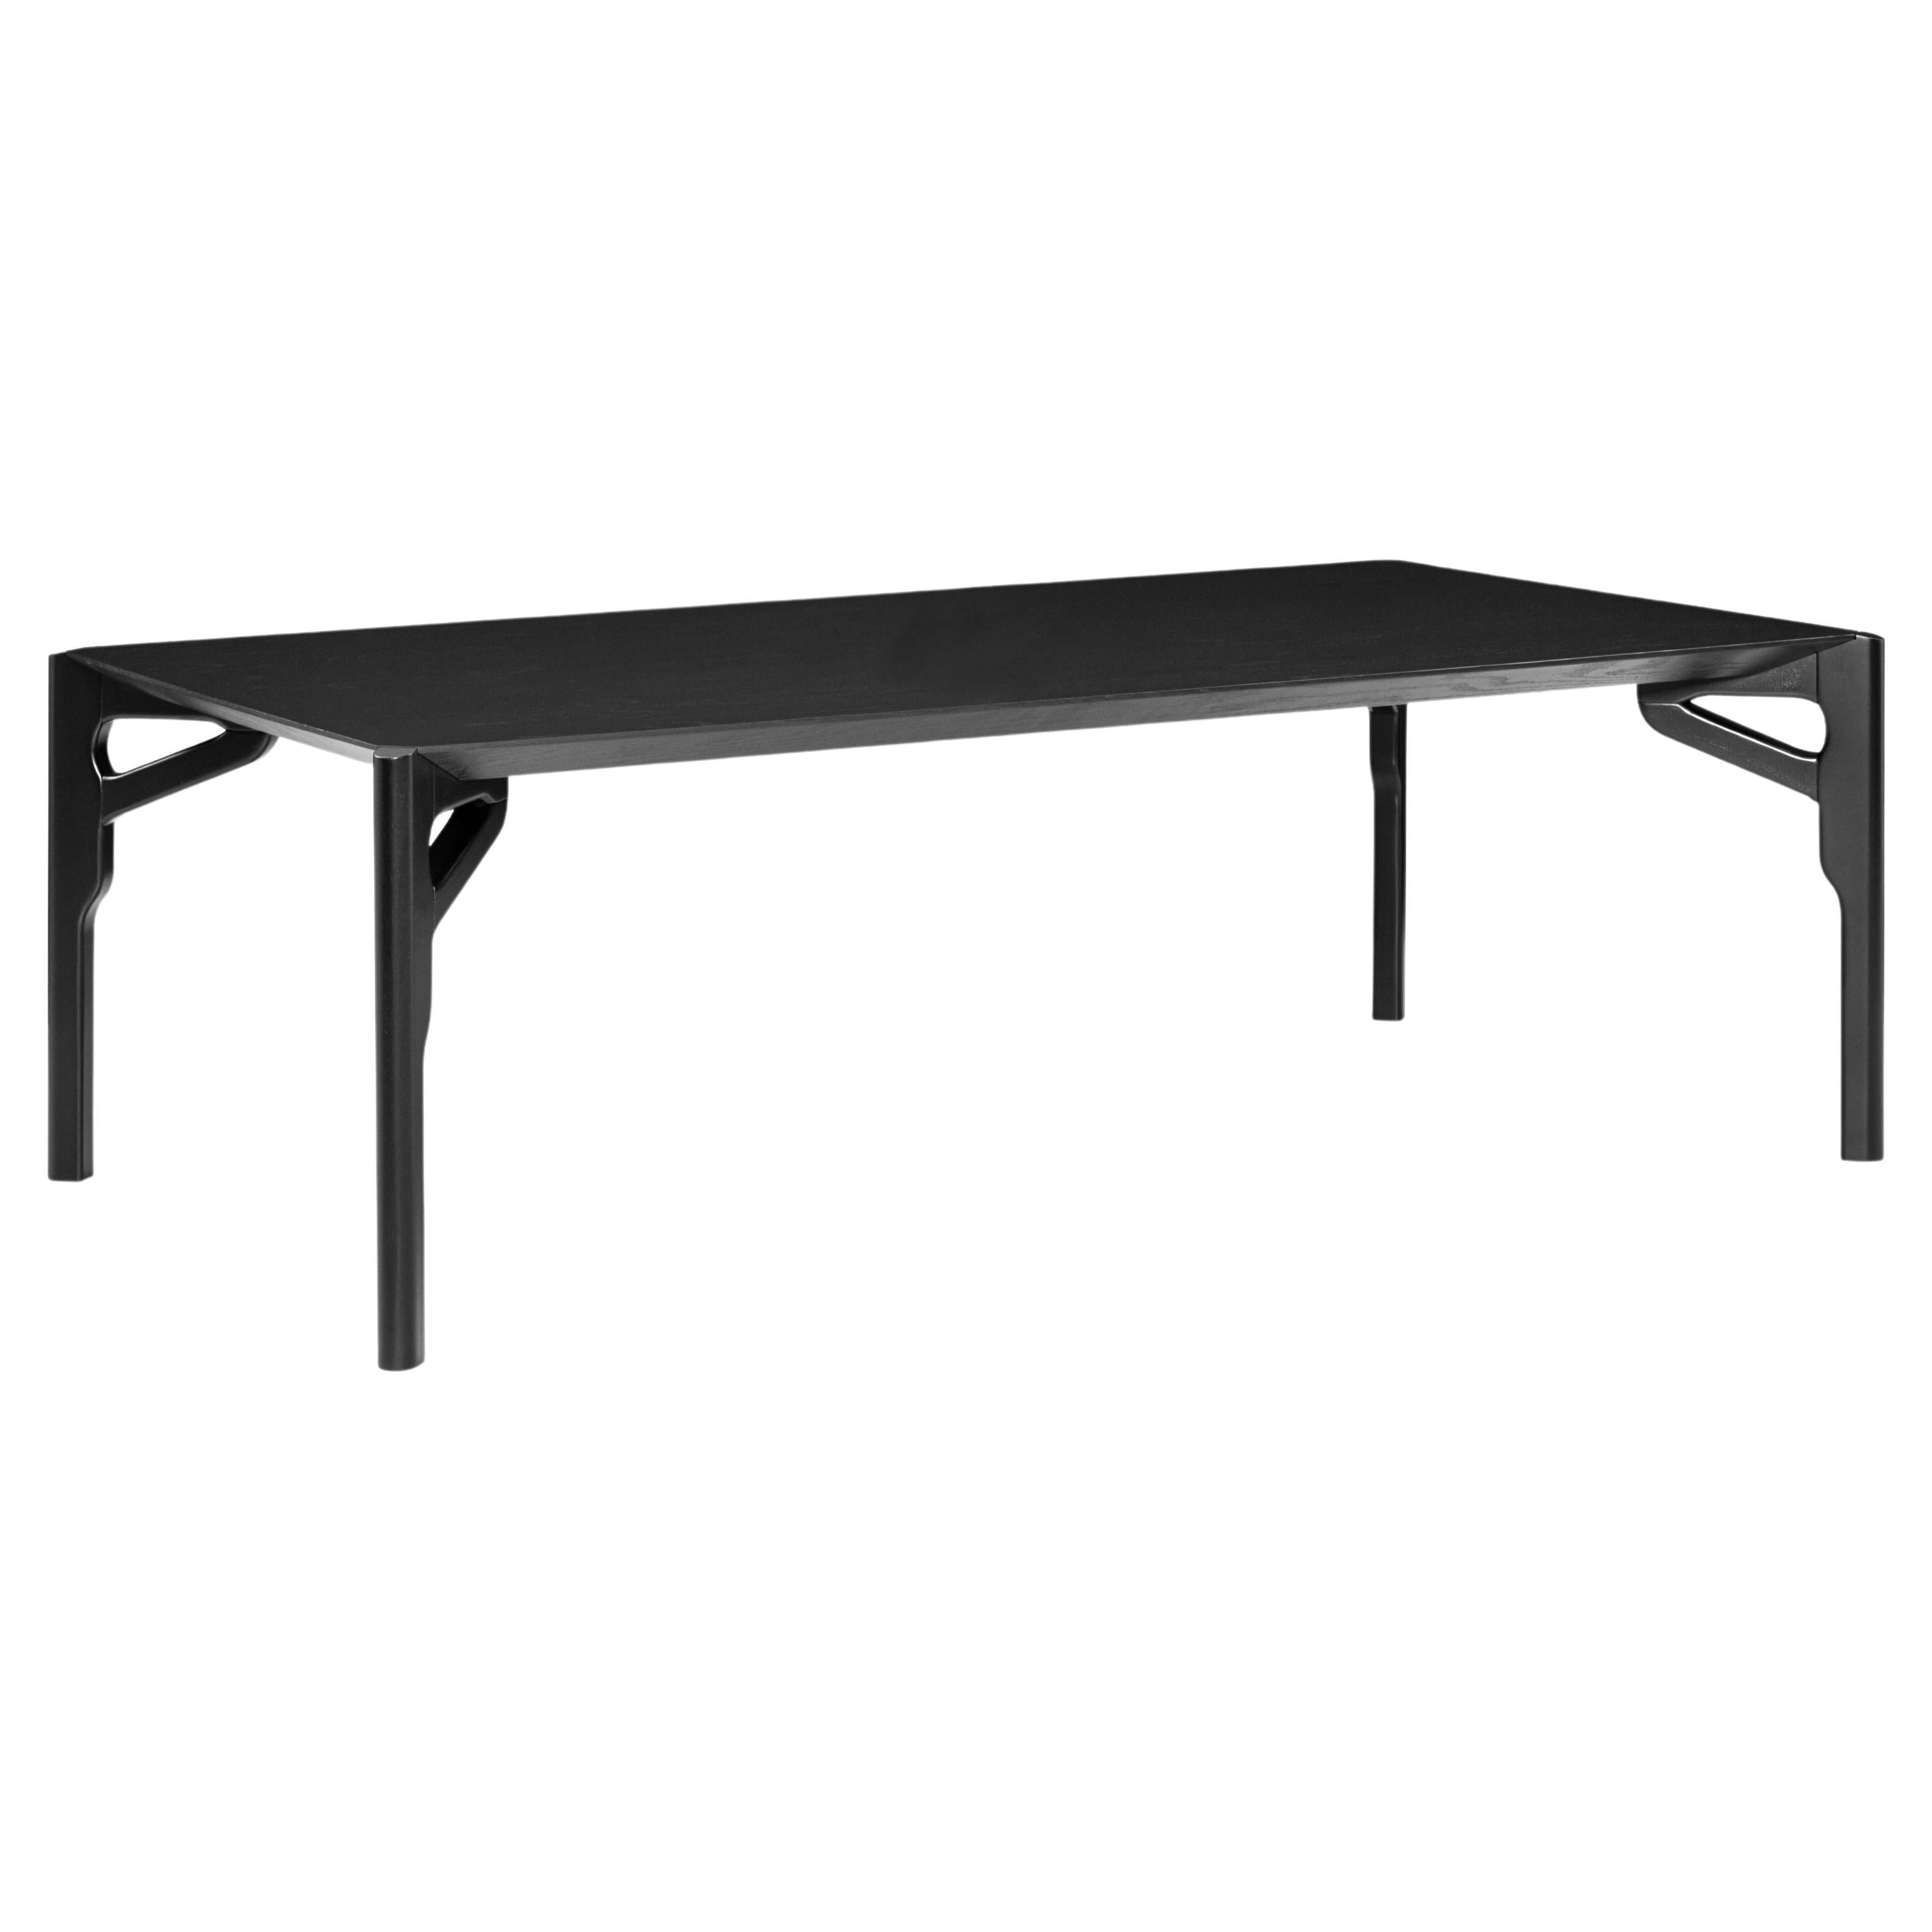 Hawk Dining Table with a Black Oak Wood Finish Table Top 86'' For Sale ...